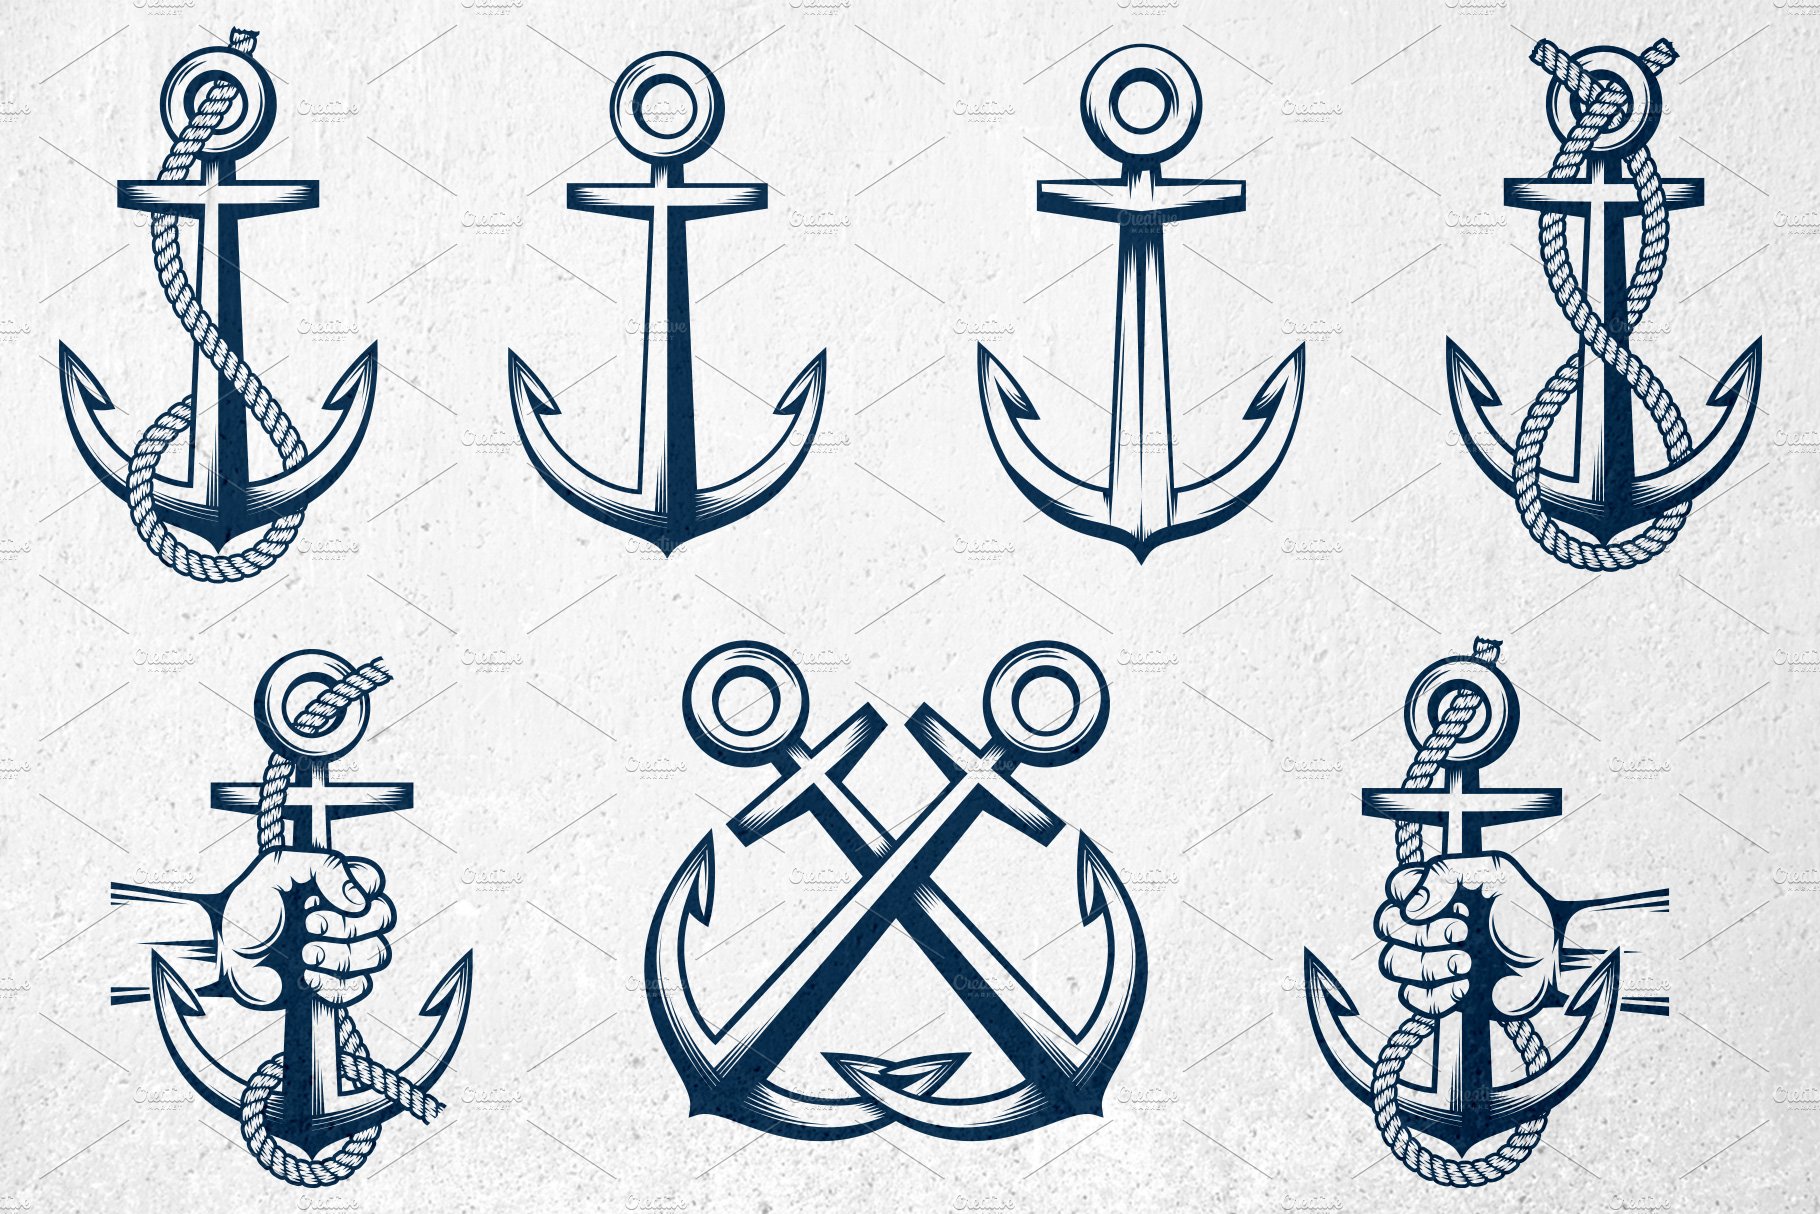 Light background with a blue anchors elements.